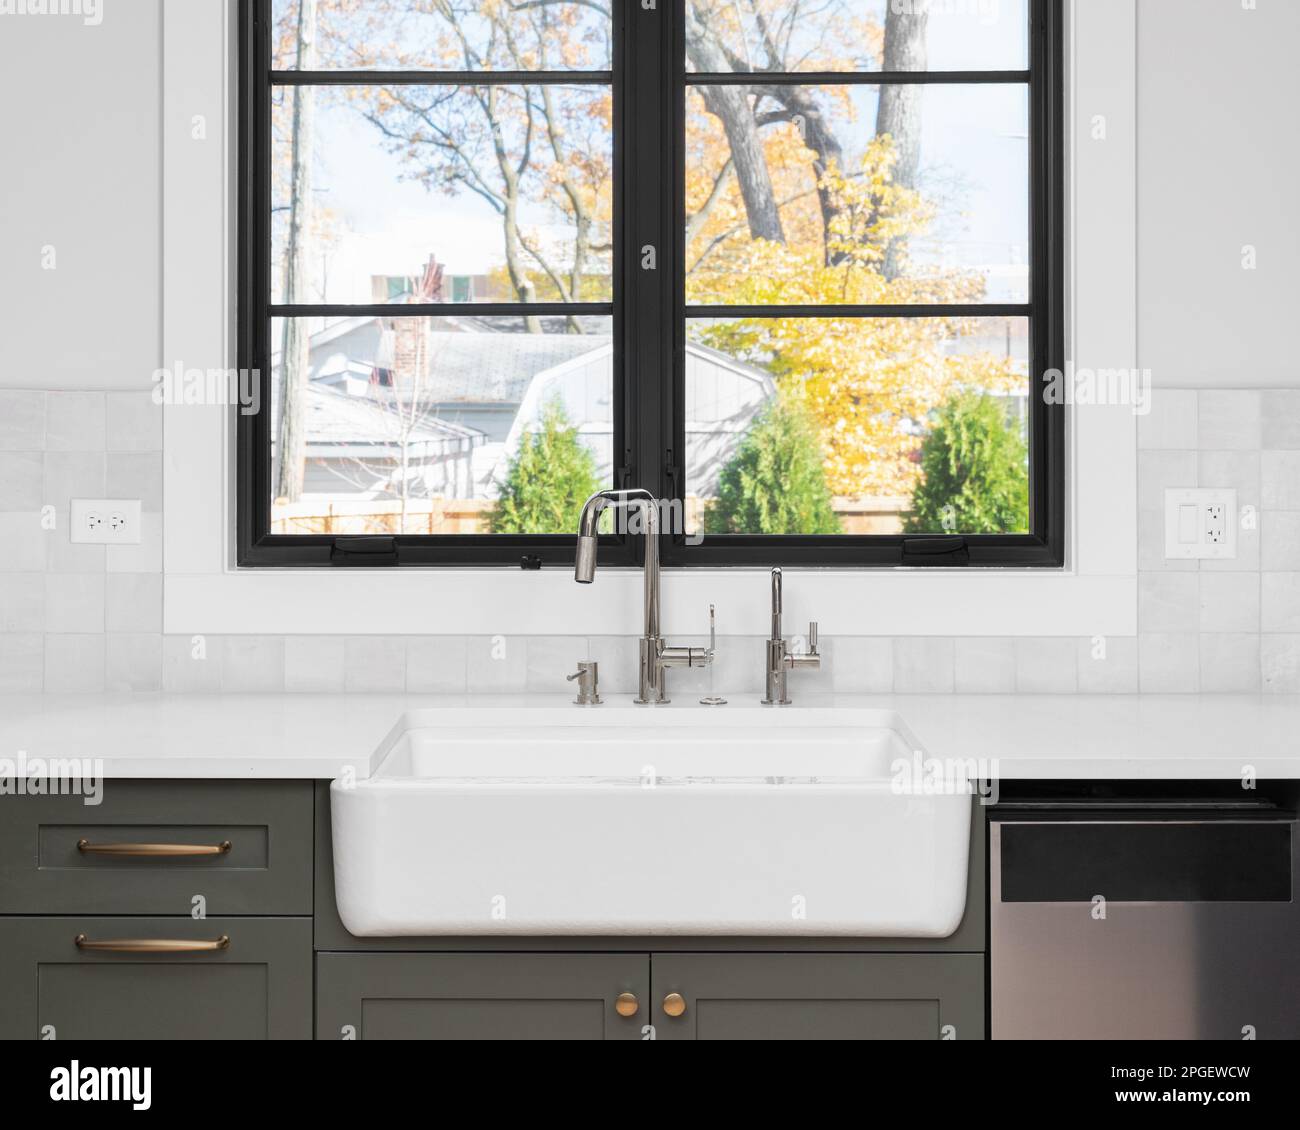 A sink detail shot with an apron sink, green cabinets, black window frame, and a tiled backsplash. Stock Photo